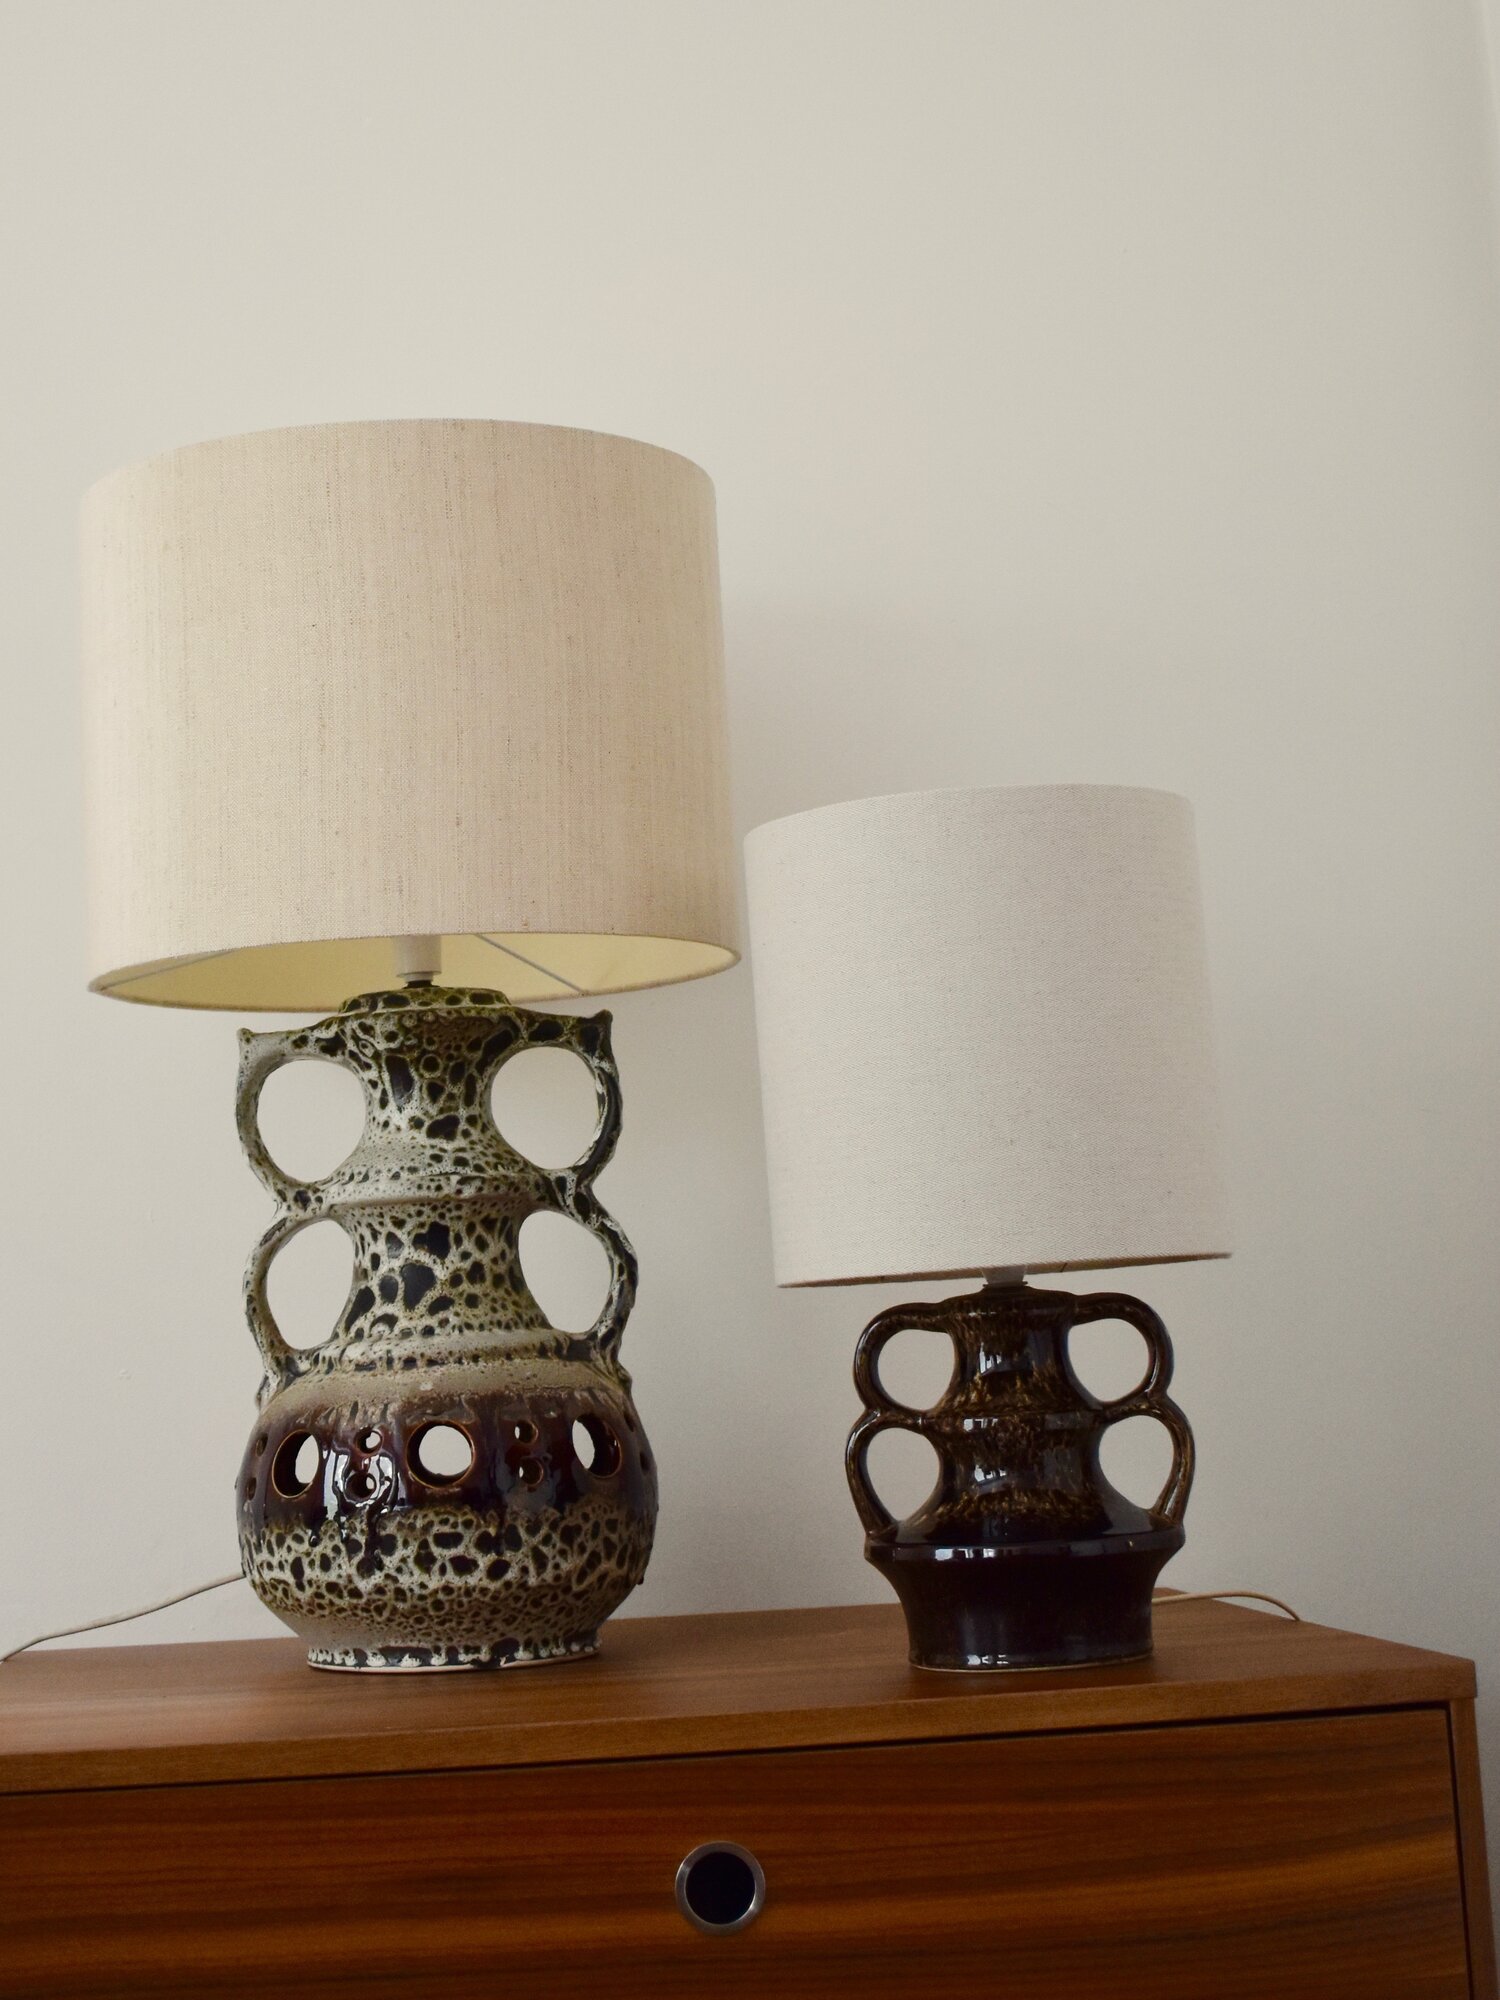 Drum Lamp Shades Feature Lighting Co Uk, Small Drum Shades For Table Lamps